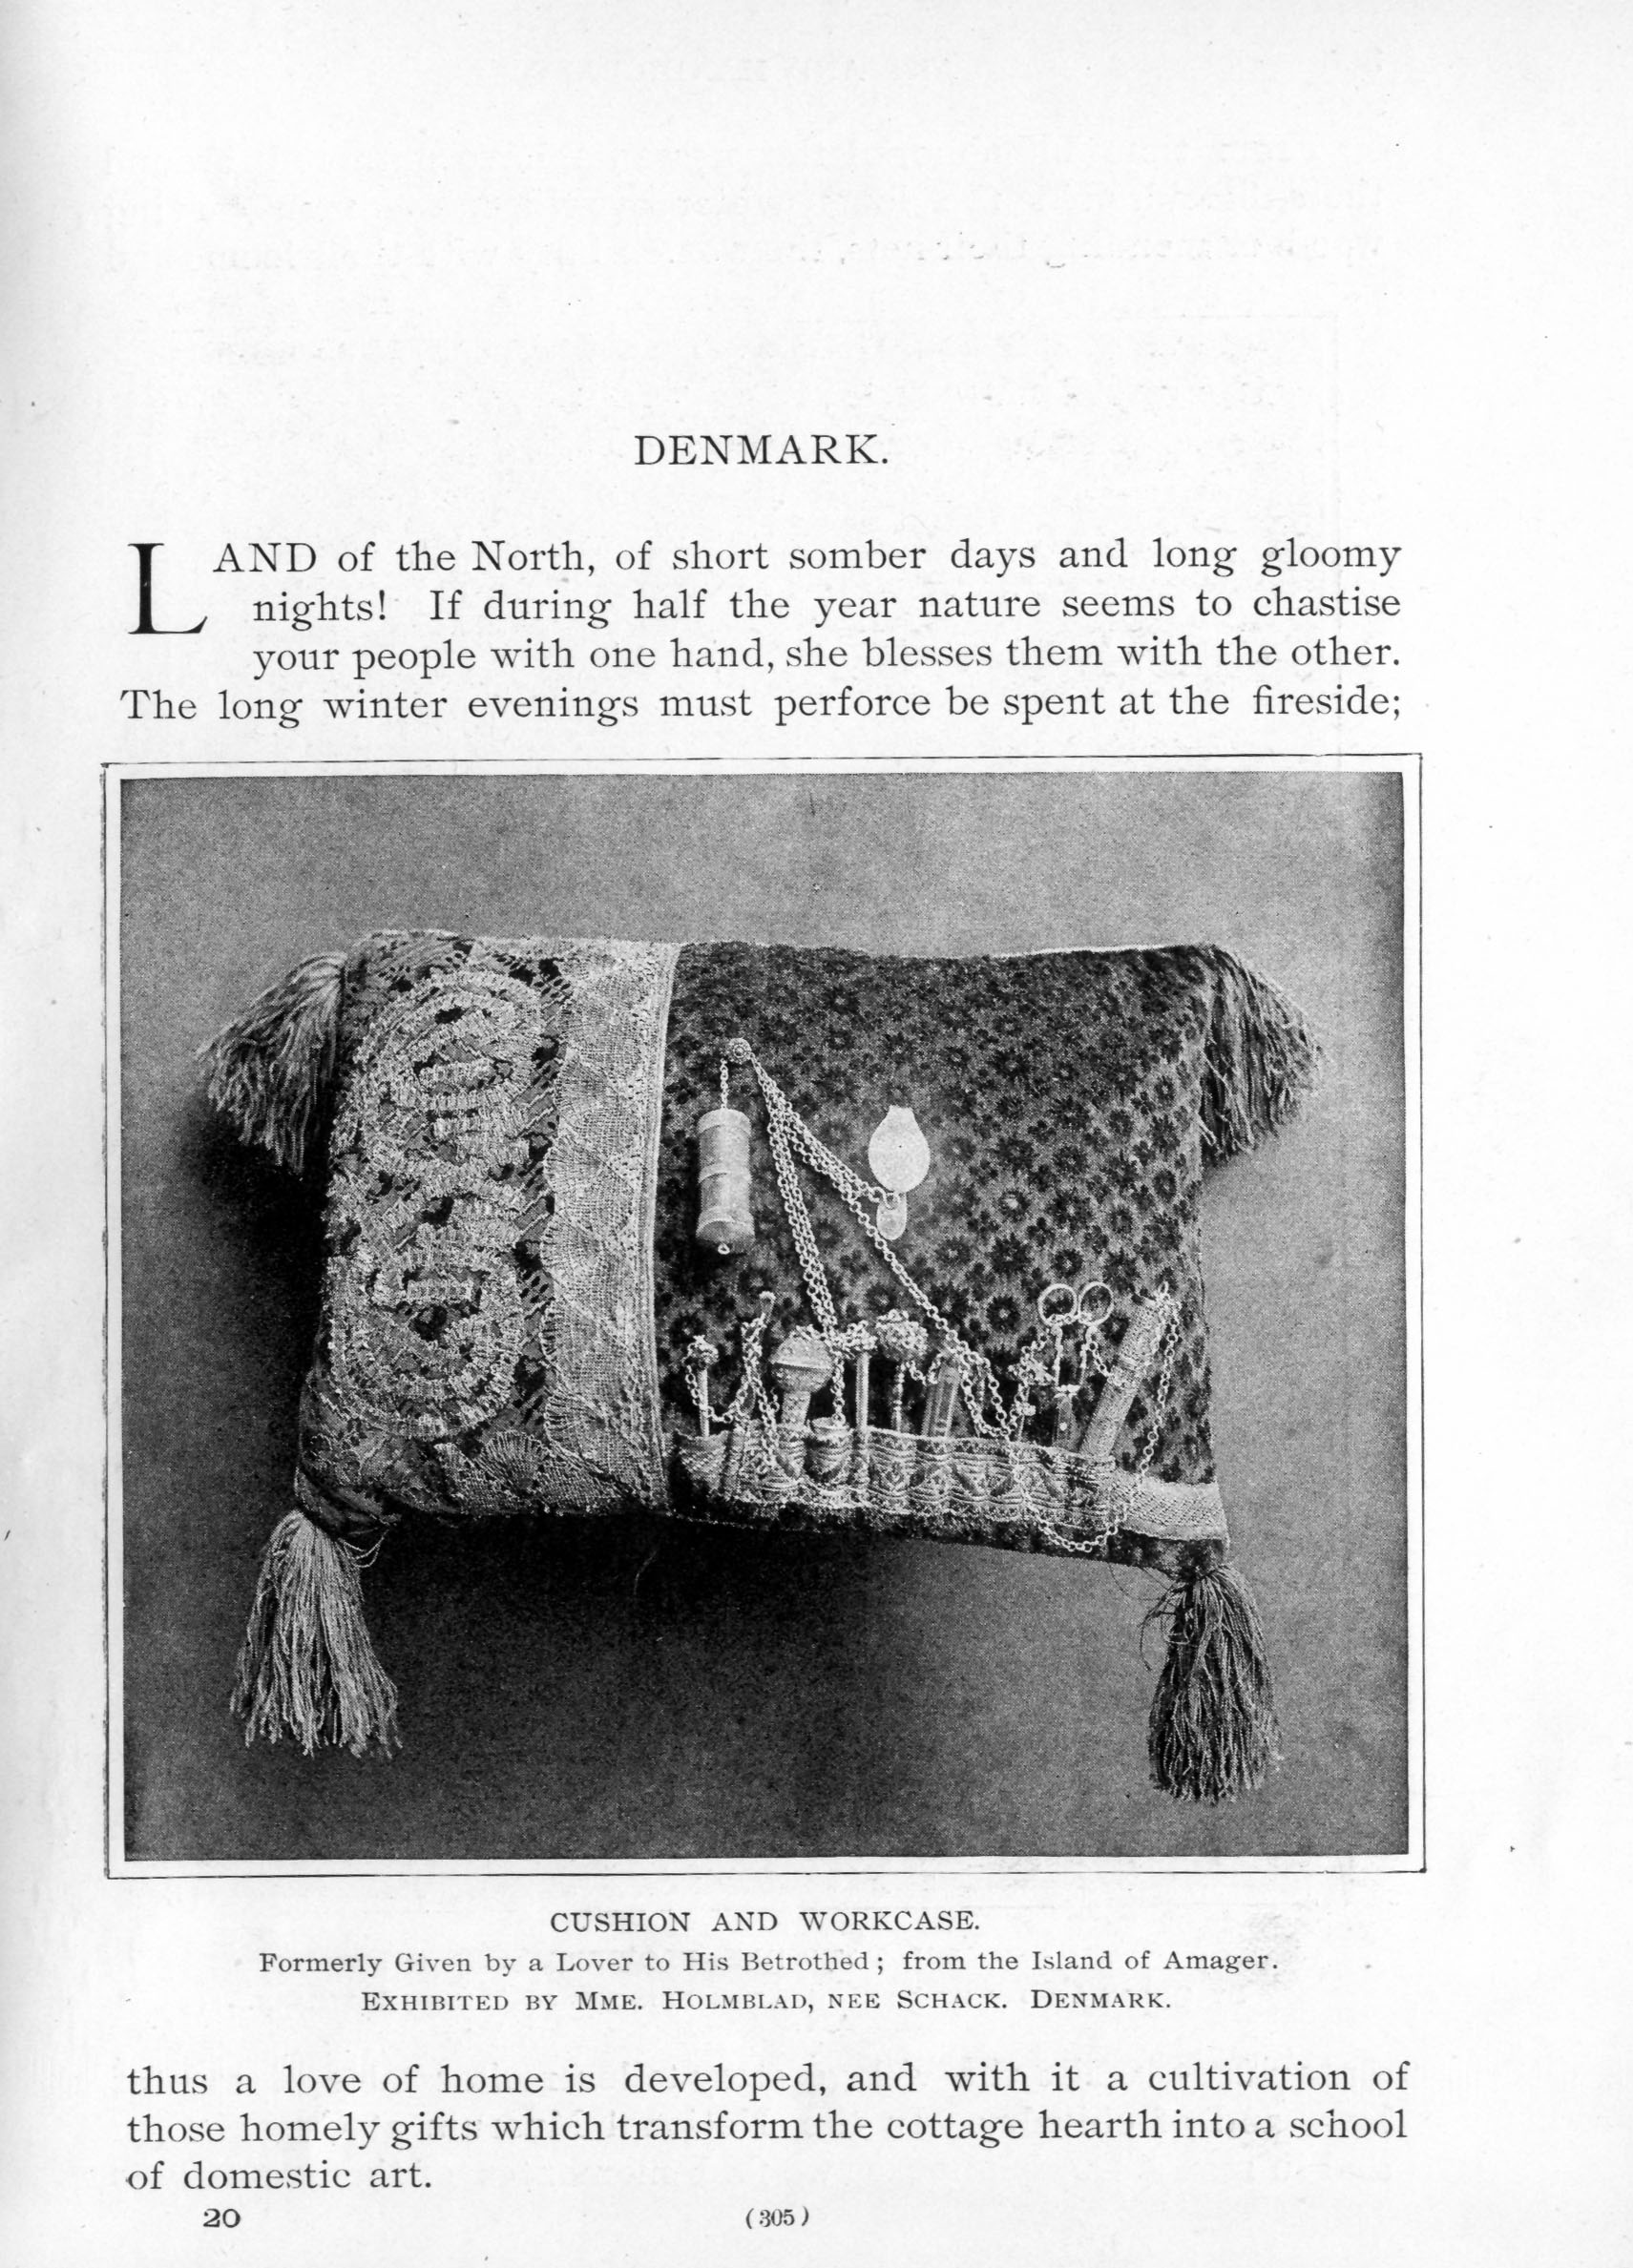 ornately embroidered and tasseled cushion including pouches for various small tools